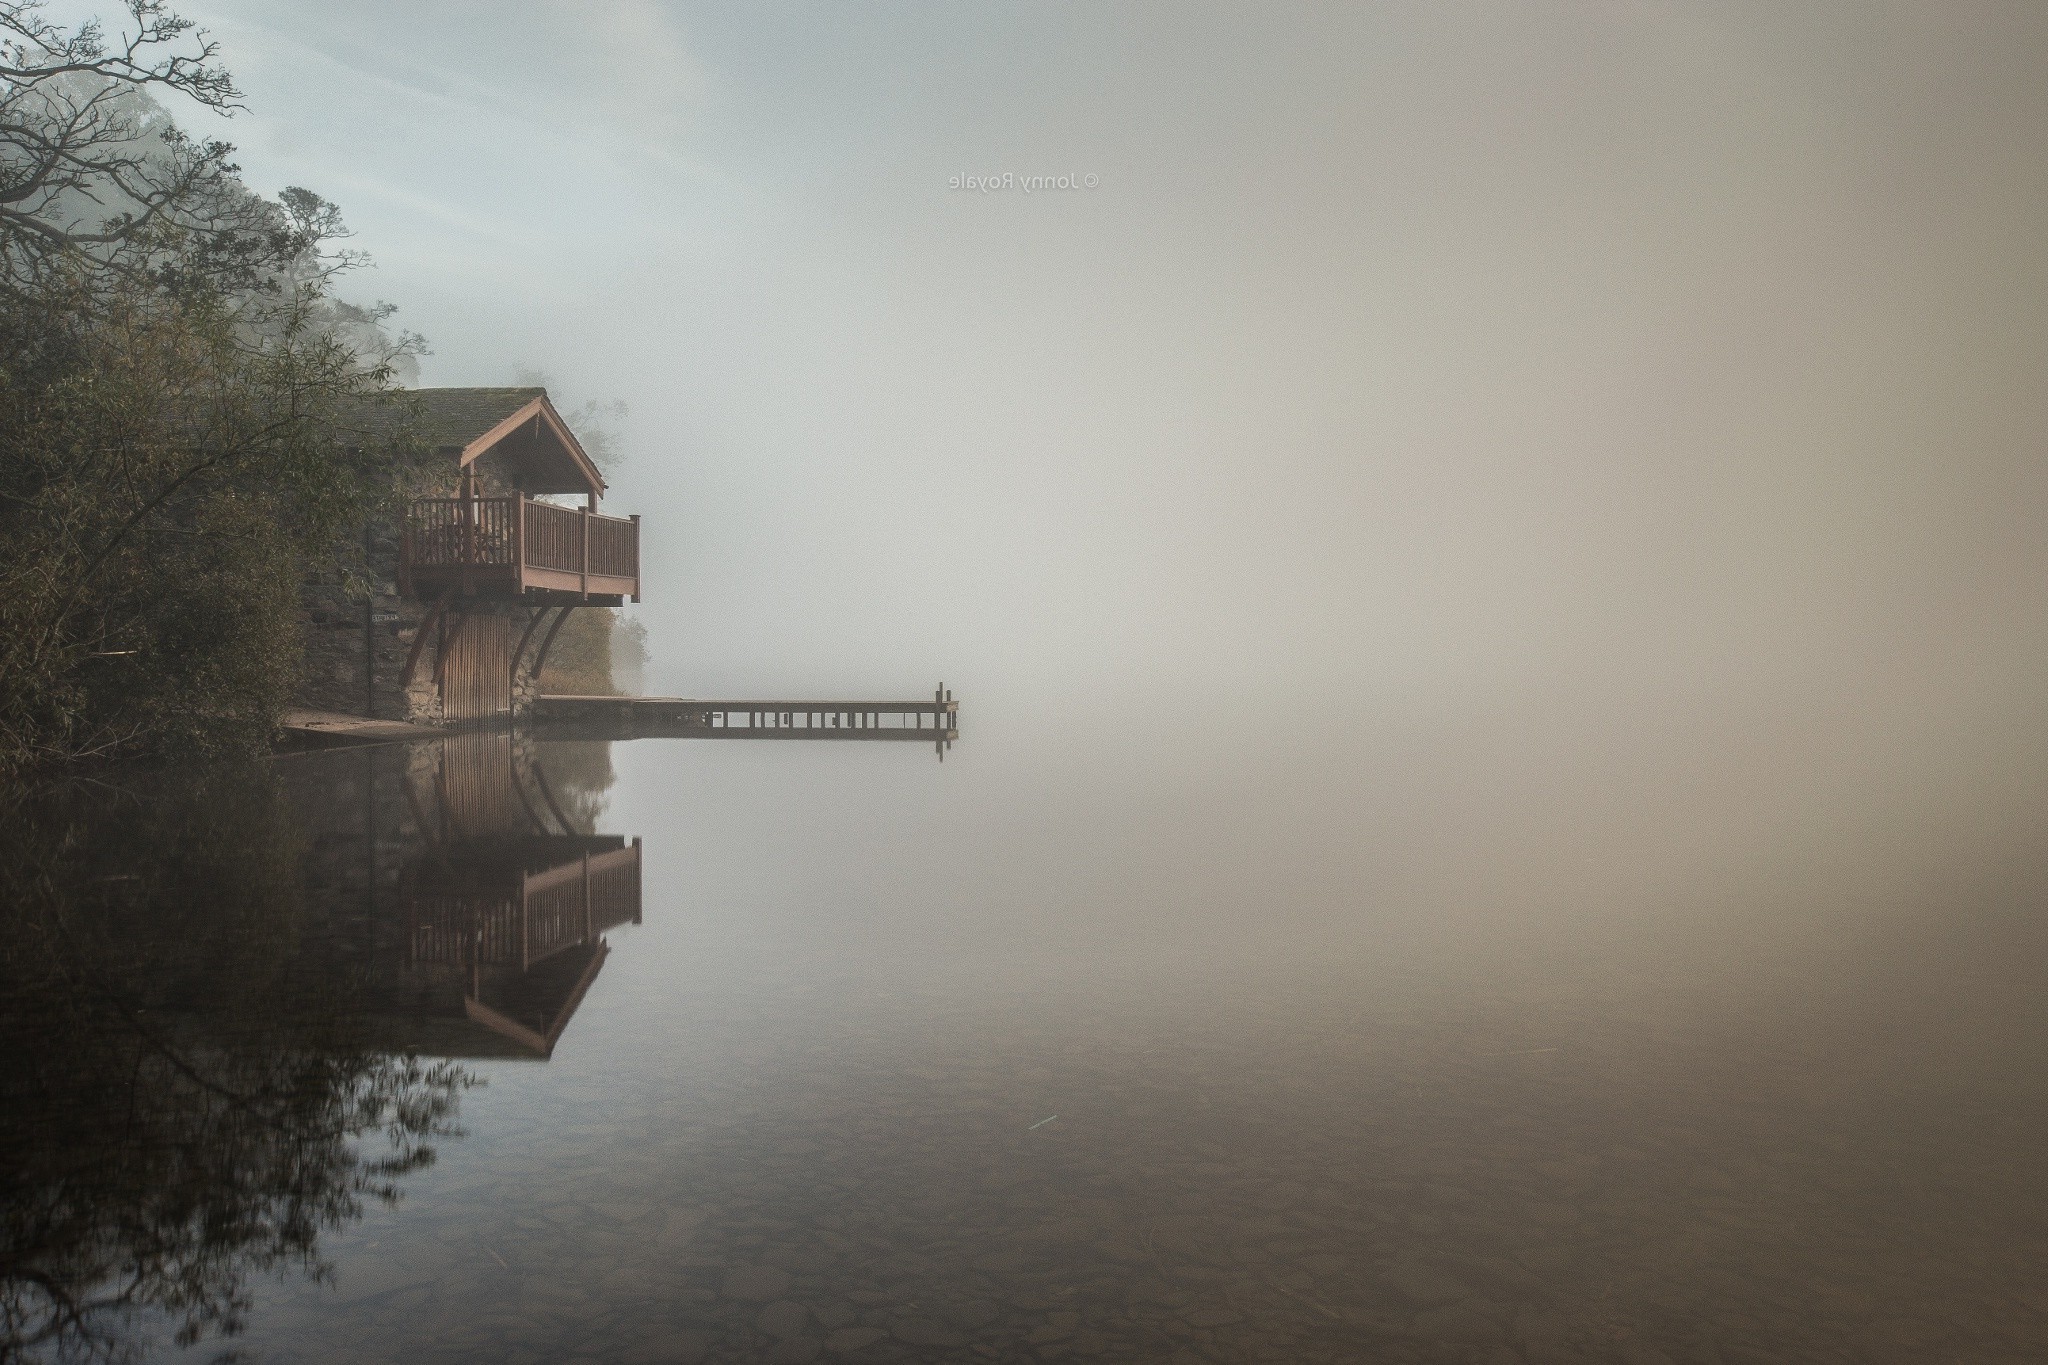 nature, Landscape, Lake, Mist, Boathouses, Trees, England, Water, Reflection, Morning, Calm Wallpaper